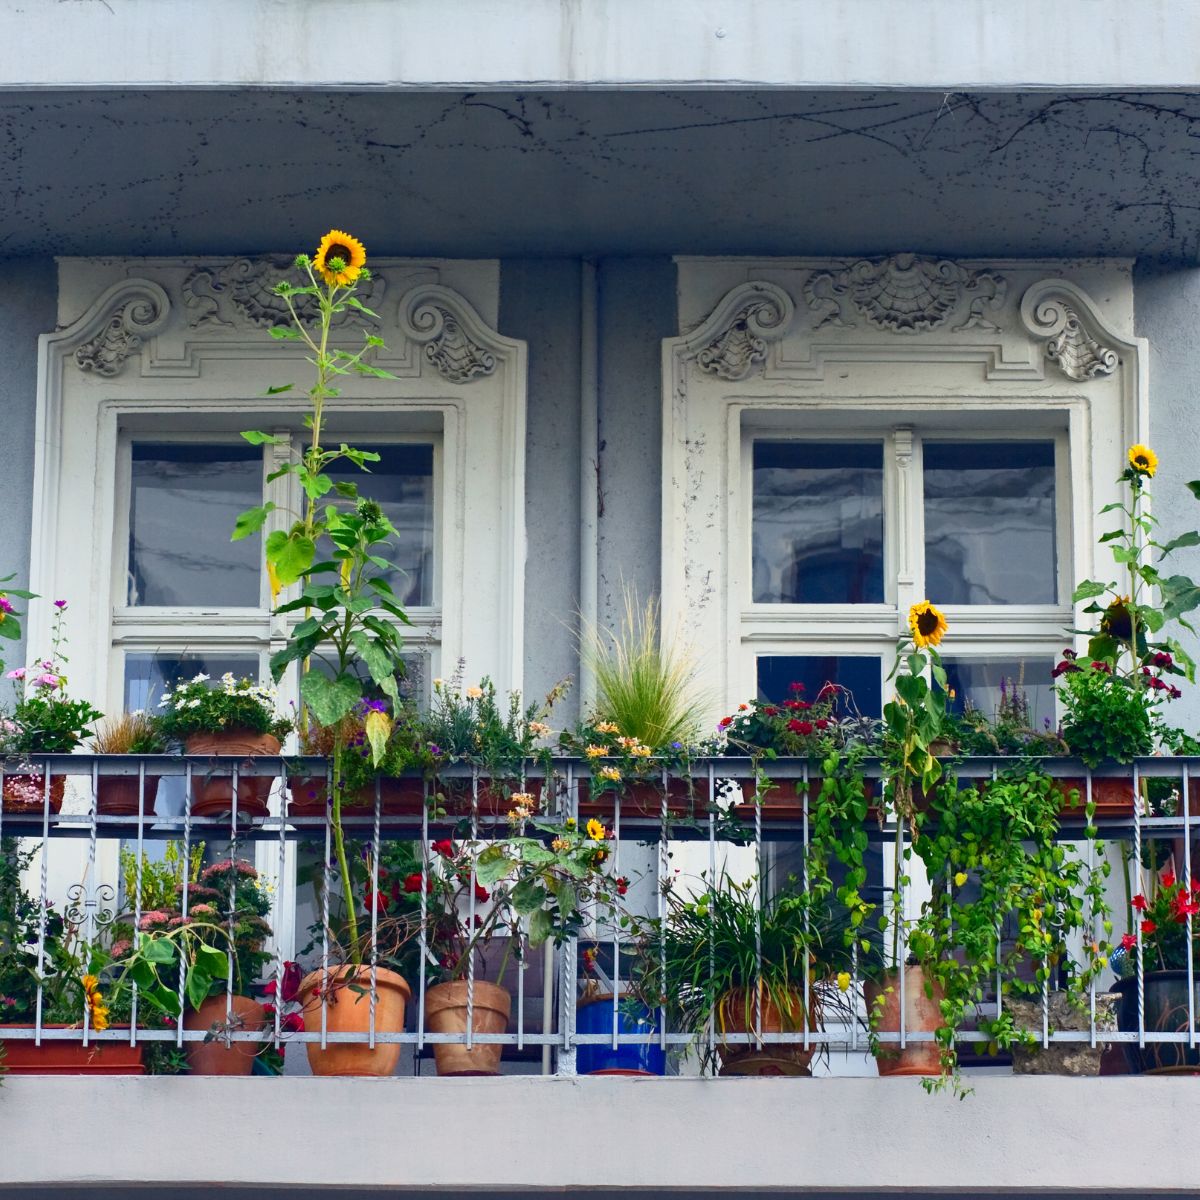 A balcony garden with a railing full of plants and two large windows behind it.